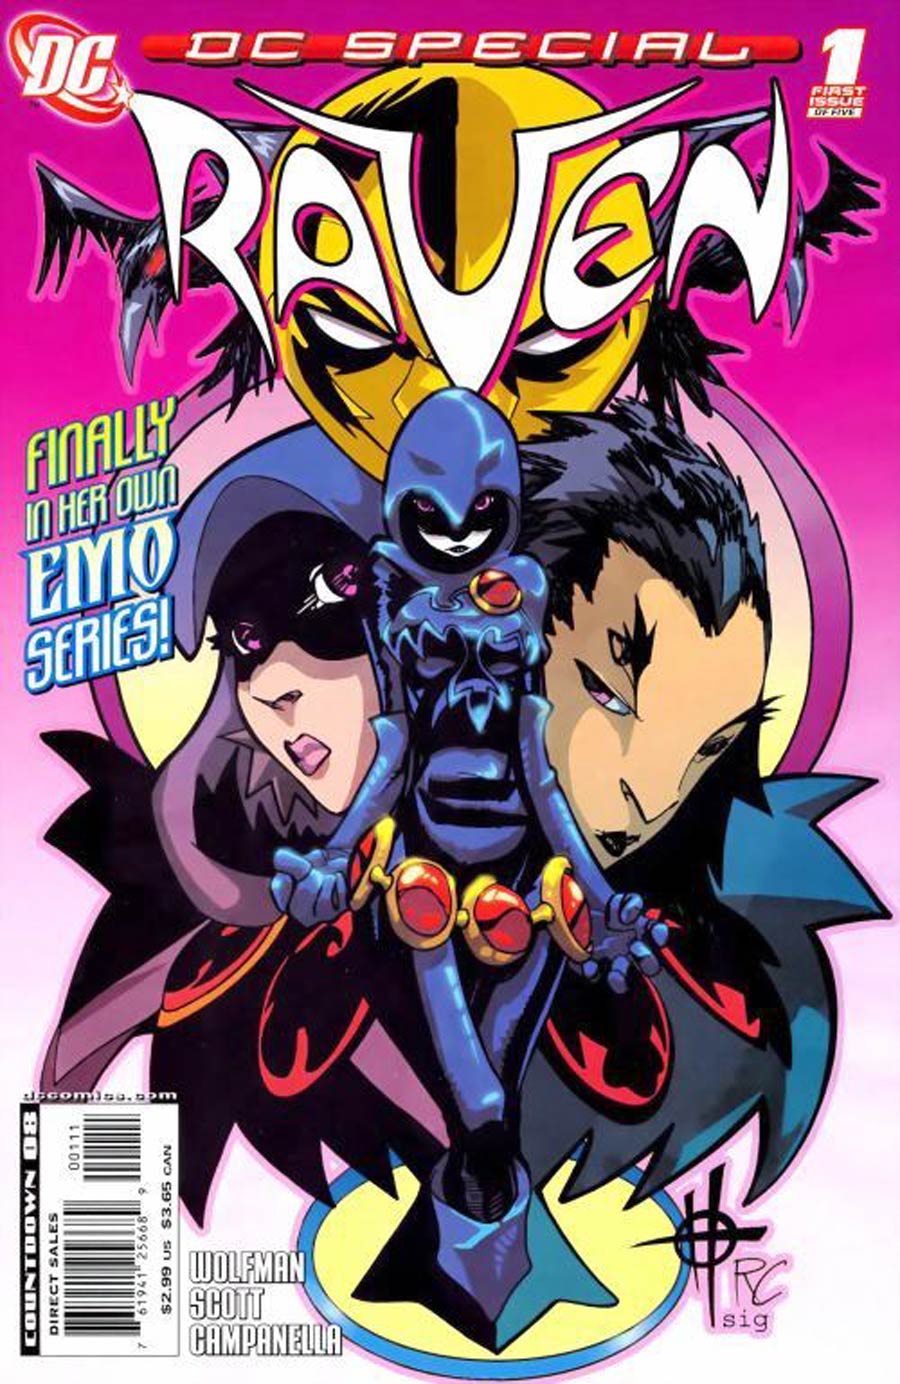 DC Special Raven #1